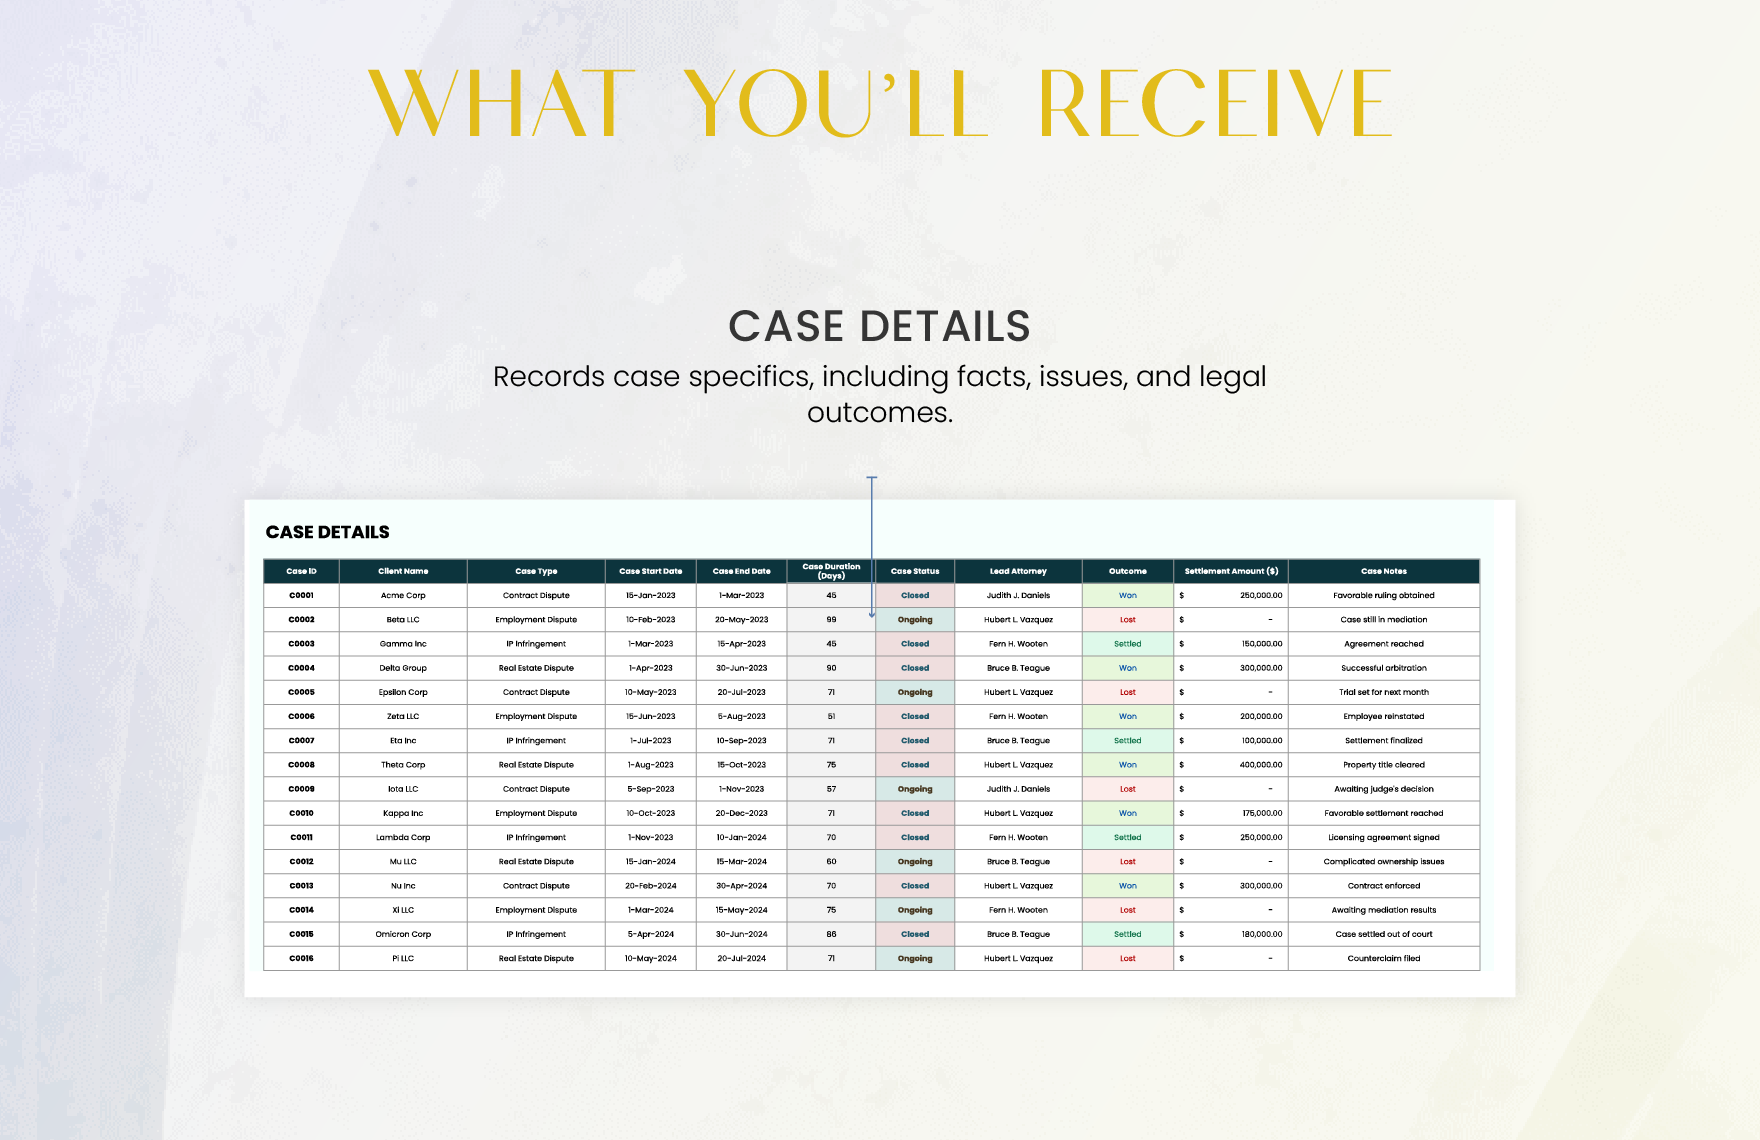 Legal Client Case Outcome Analysis Template